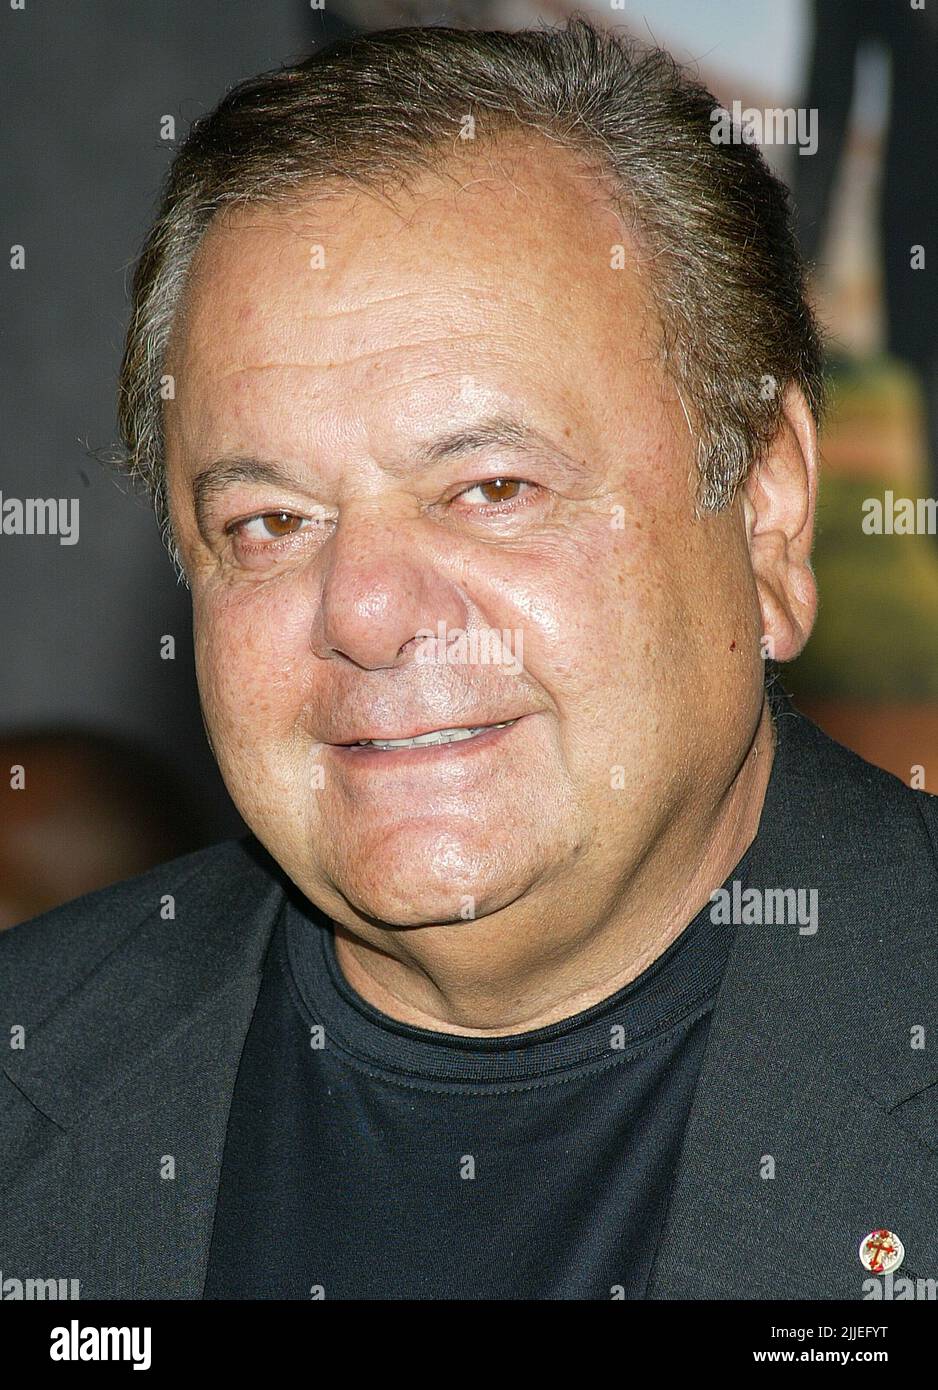 PAUL SORVINO (April 13, 1939 - July 25, 2022) was an American actor, opera singer, businessman, writer, and sculptor. He often portrayed authority figures on both sides of the law and was known for his roles in the 1990 gangster film 'Goodfellas', and the TV series 'Law & Order'. FILE PHOTO SHOT ON: September 8, 2004, Hollywood, California, USA: Actor PAUL SORVINO at the Los Angeles Premiere of' Mr. 3000' held at the El Capitan Theatre. (Credit Image: Rena Durham/ZUMAPRESS.com) Stock Photo